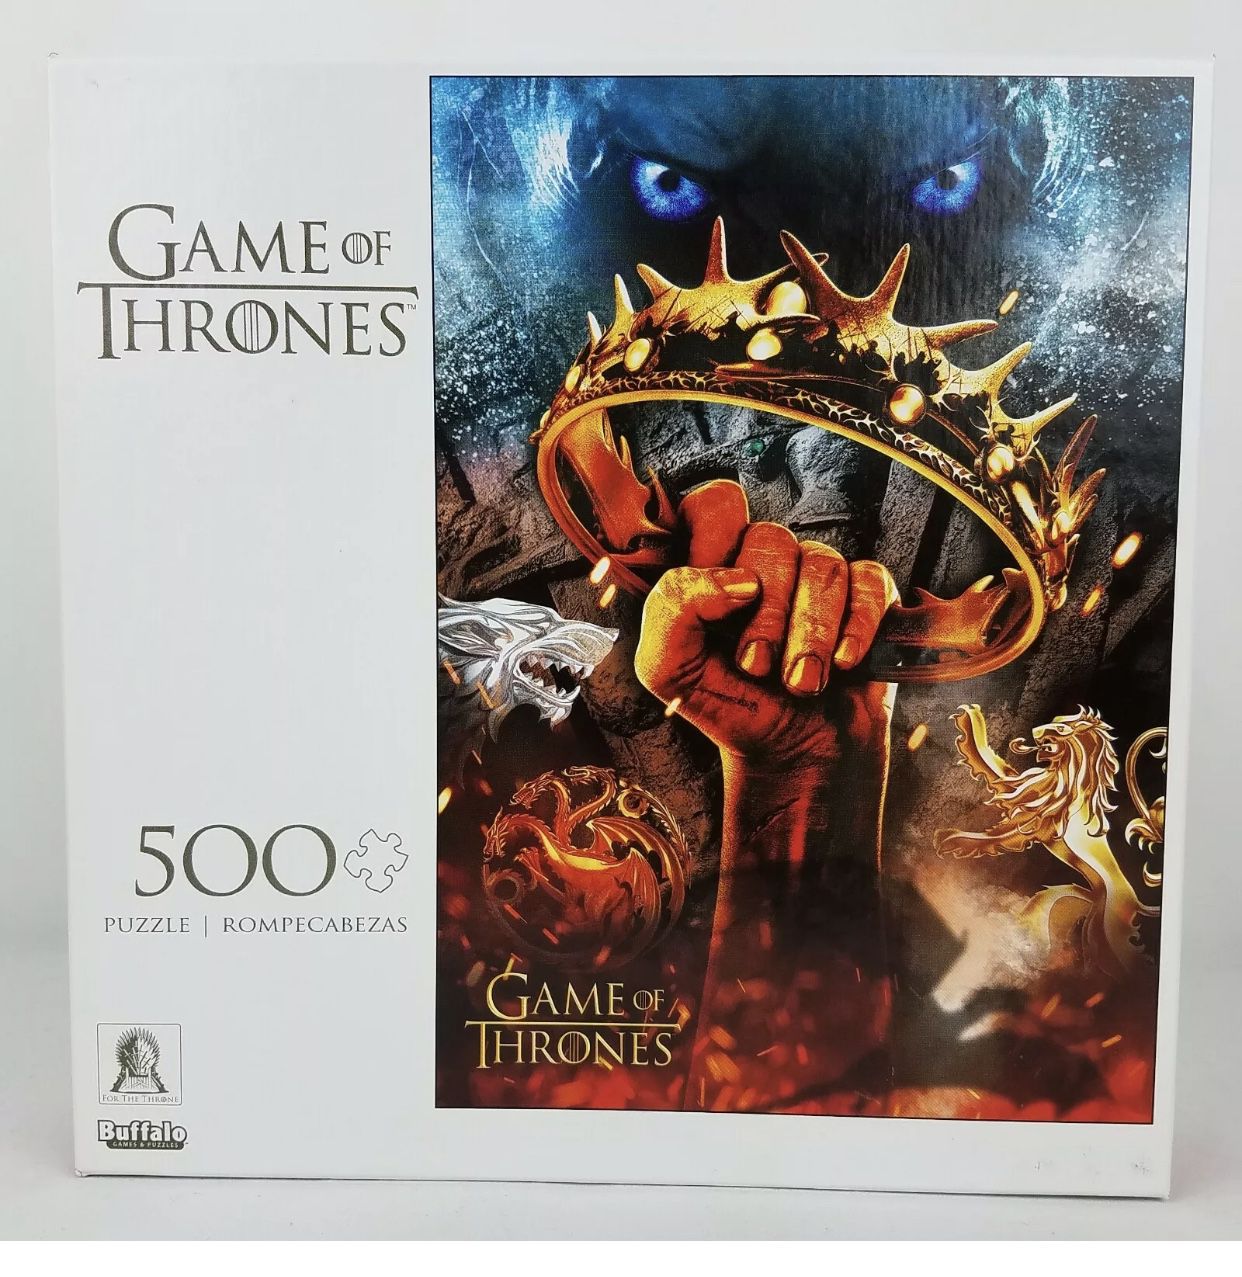 Buffalo Games - GAME OF THRONES - For The Throne - 500 Piece Jigsaw PUZZLE - New